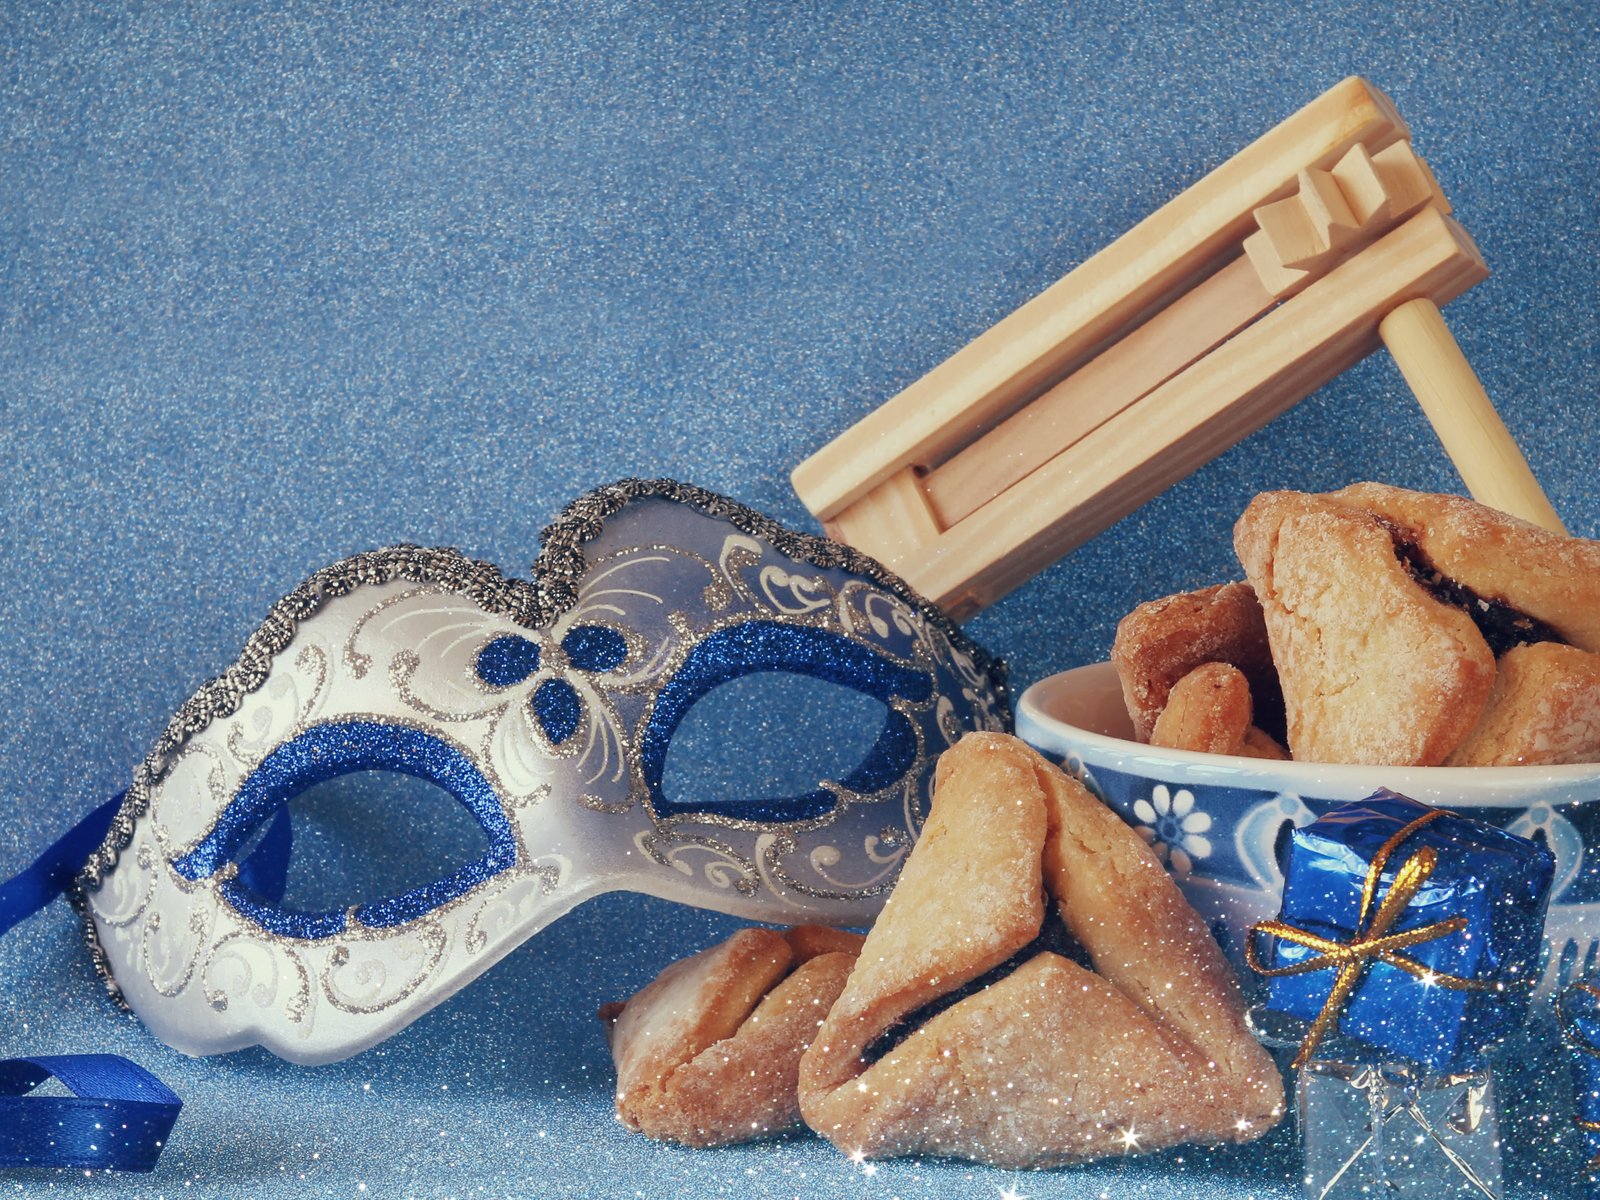 Purim&nbsp;is one of the most joyous and fun holidays on the Jewish calendar.